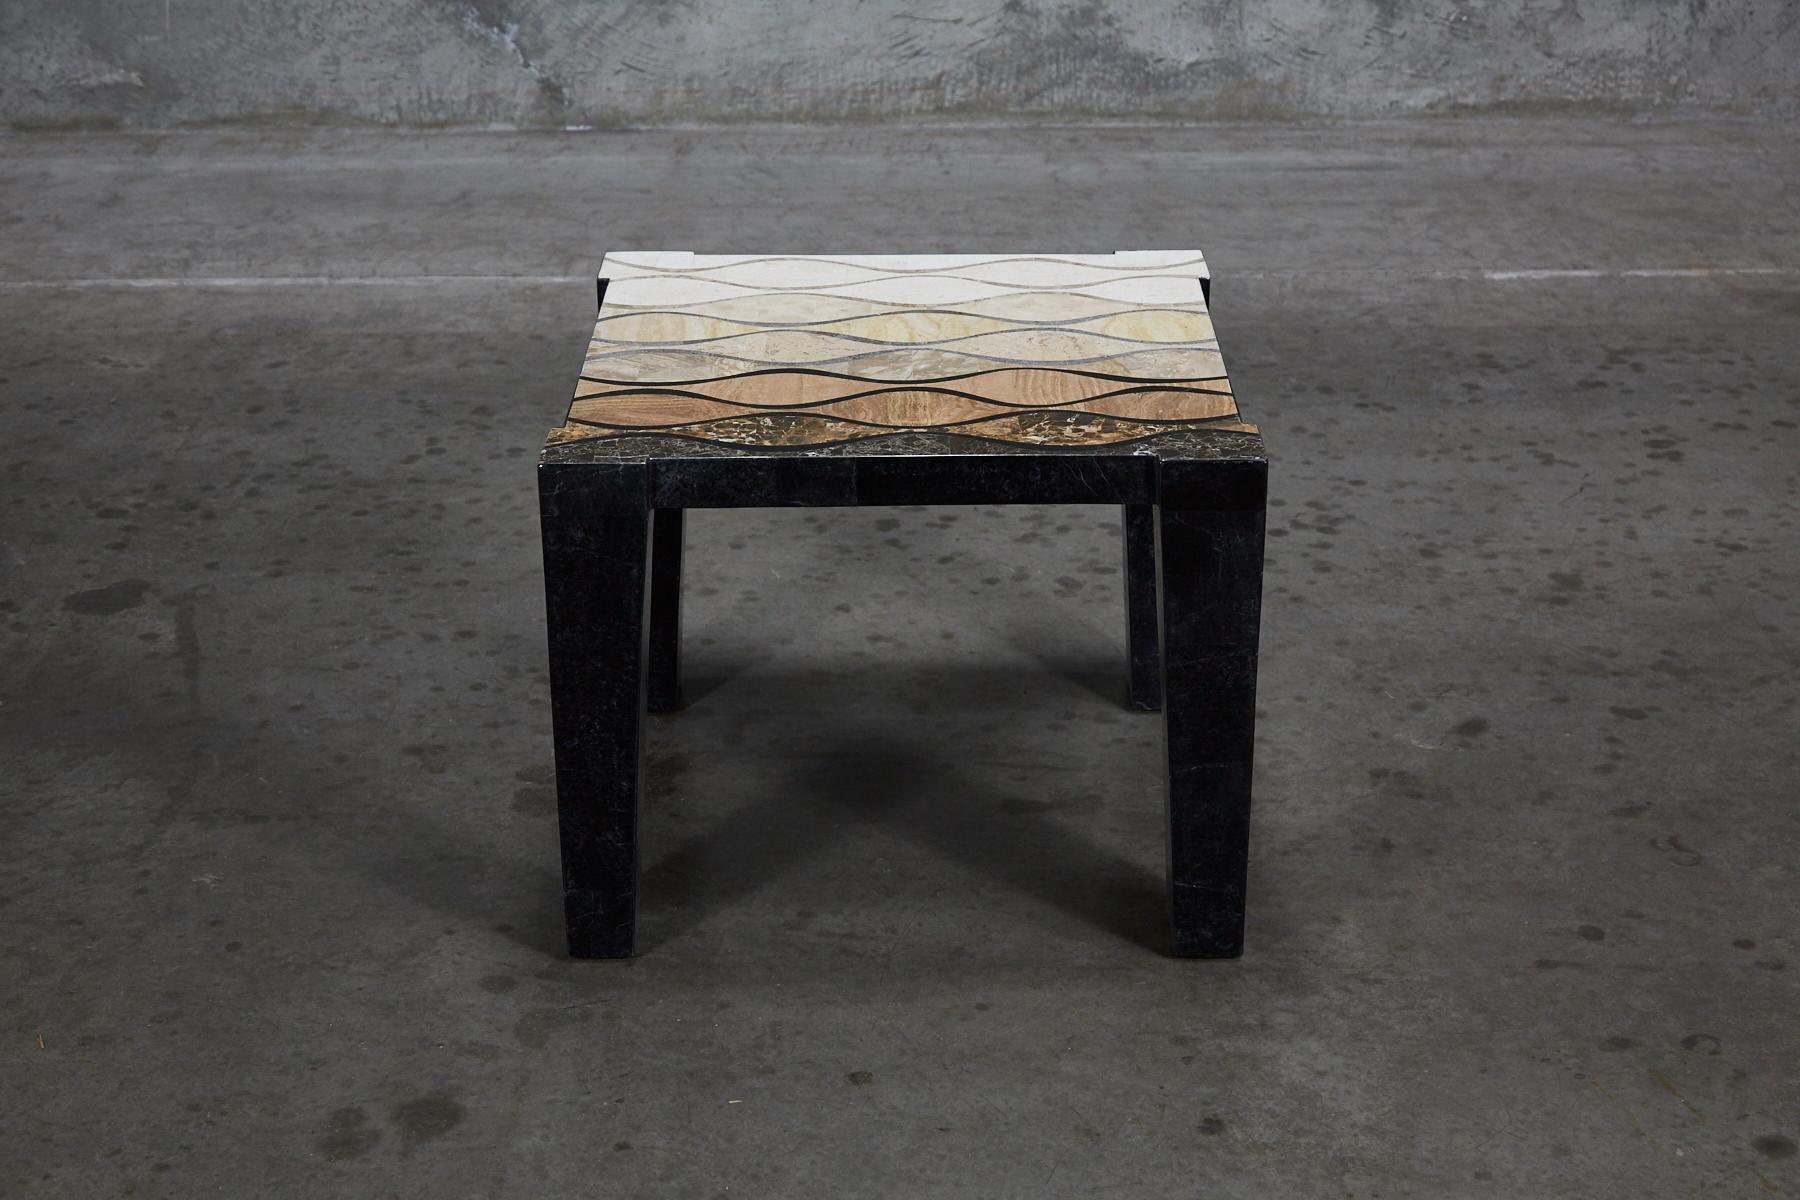 Simple rectilinear side table fully inlaid with tessellated stone. Legs in solid black stone. Tabletop inlaid with stylized wavy pattern executed in snakeskin stone, woodstone and cantor stone inlay. Handmade in the Philippines.

Coordinating